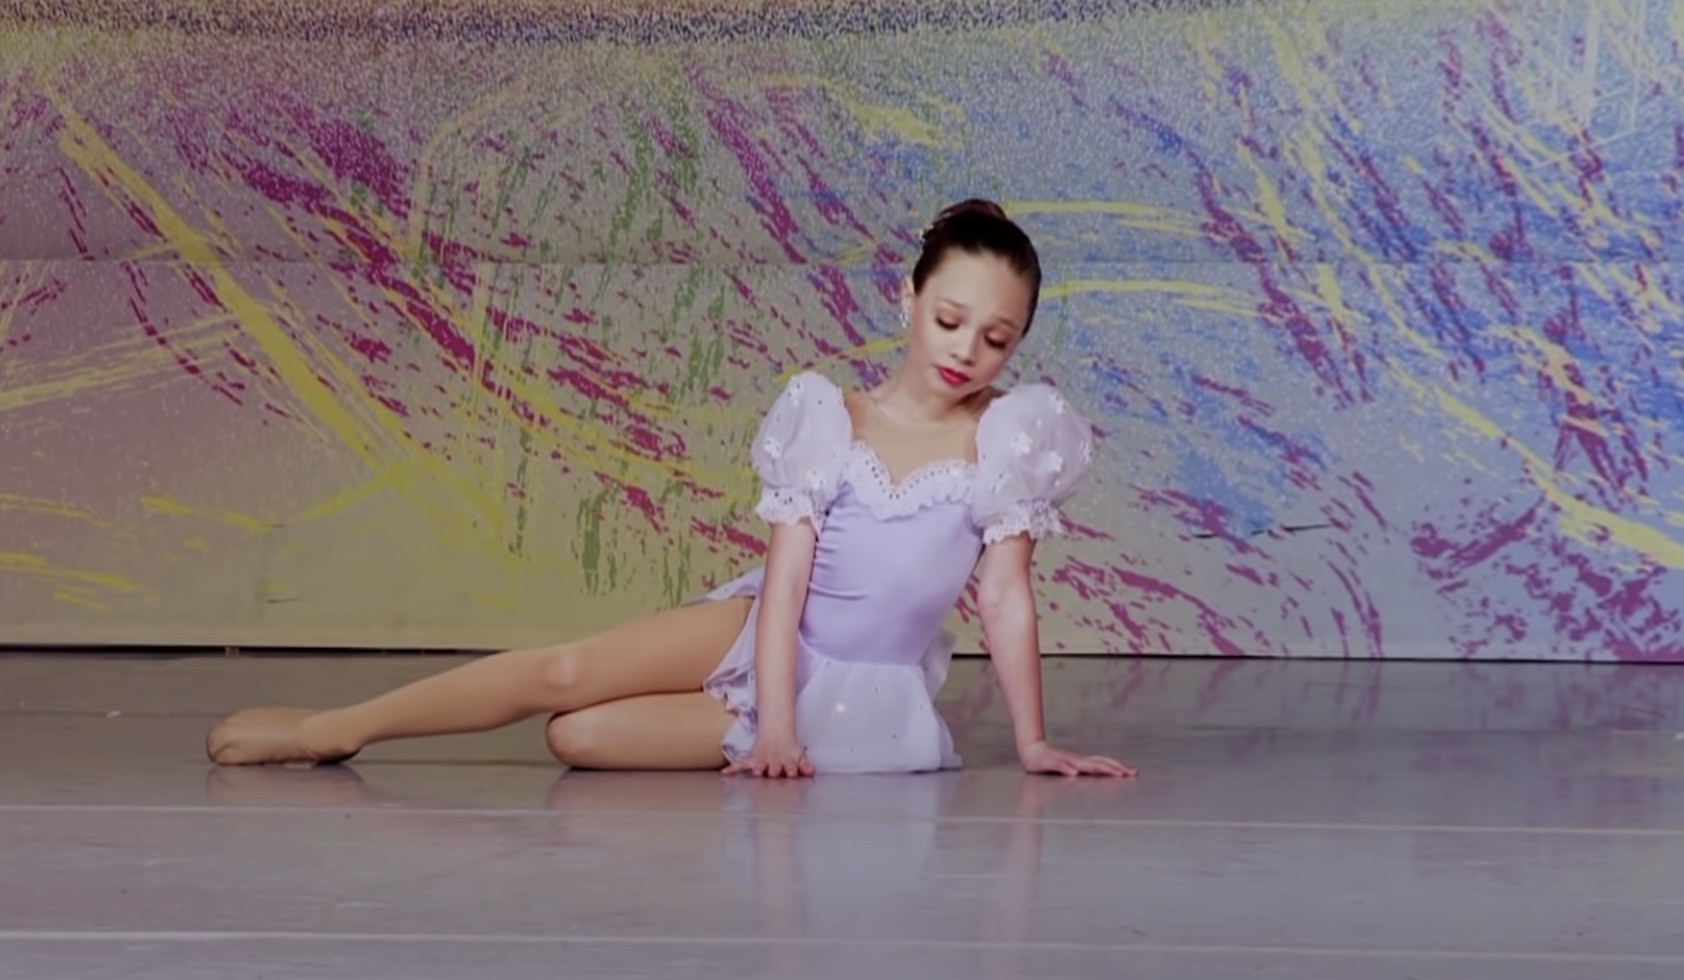 Maddie sitting on the floor in a dance outfit as a child